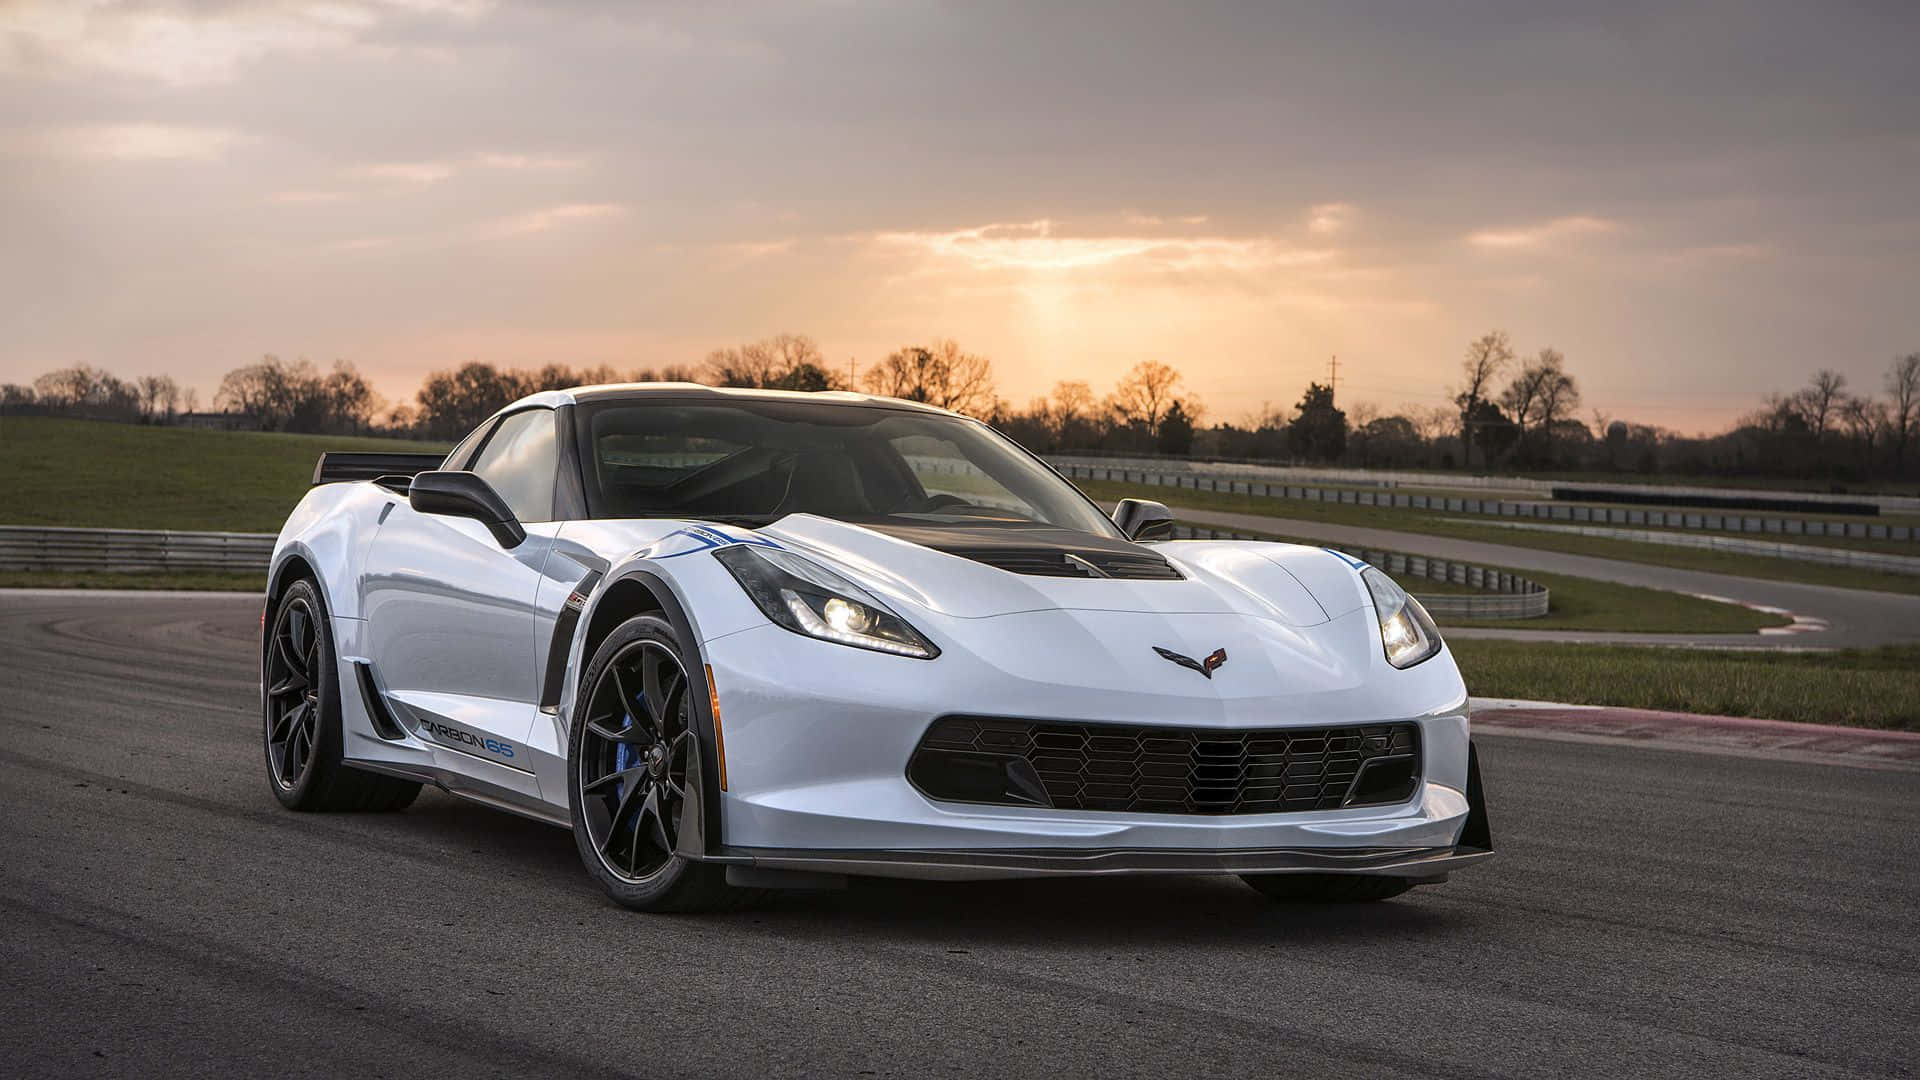 Vroom, Vroom! Enjoy the Ride with this Classic Corvette